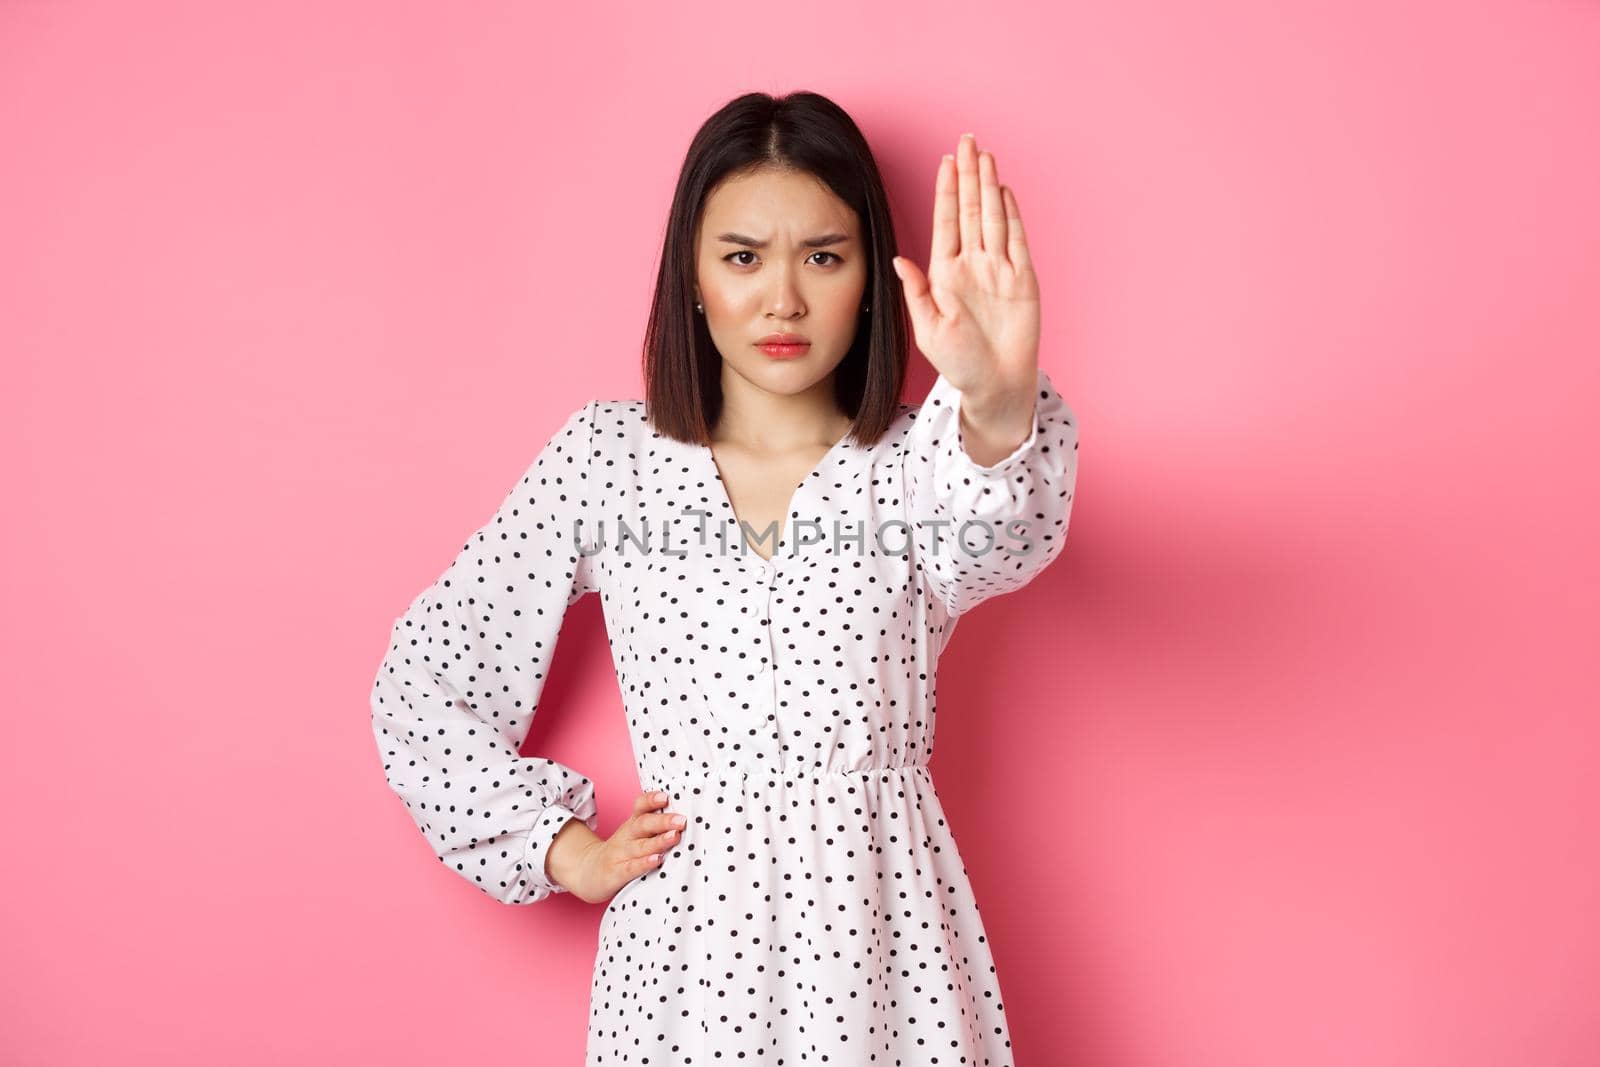 Angry asian woman tell stop, extend arm to prohibit or disapprove something, frowning displeased, standing over pink background.